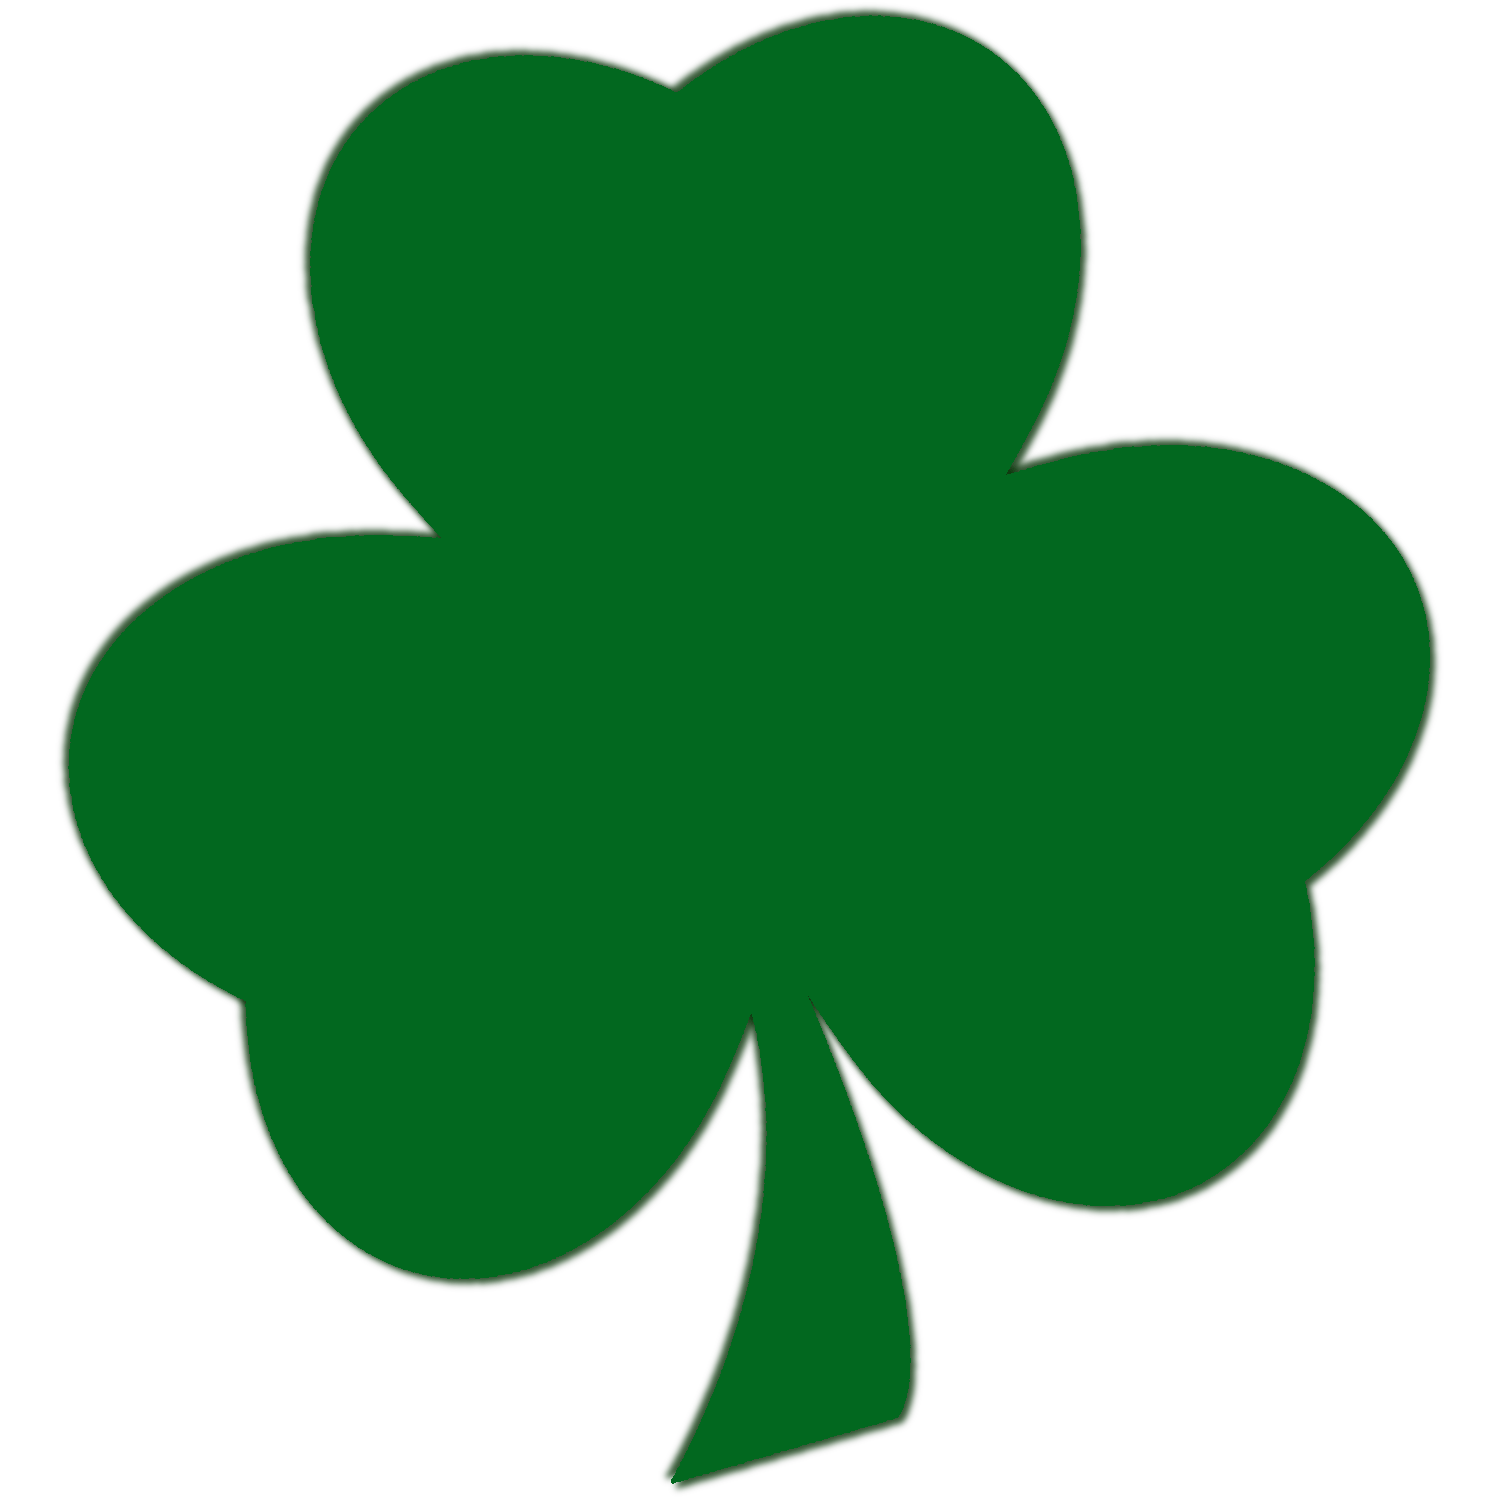 St. Patrick Logo - St. Patrick's Day Marketing Ideas For Your Business